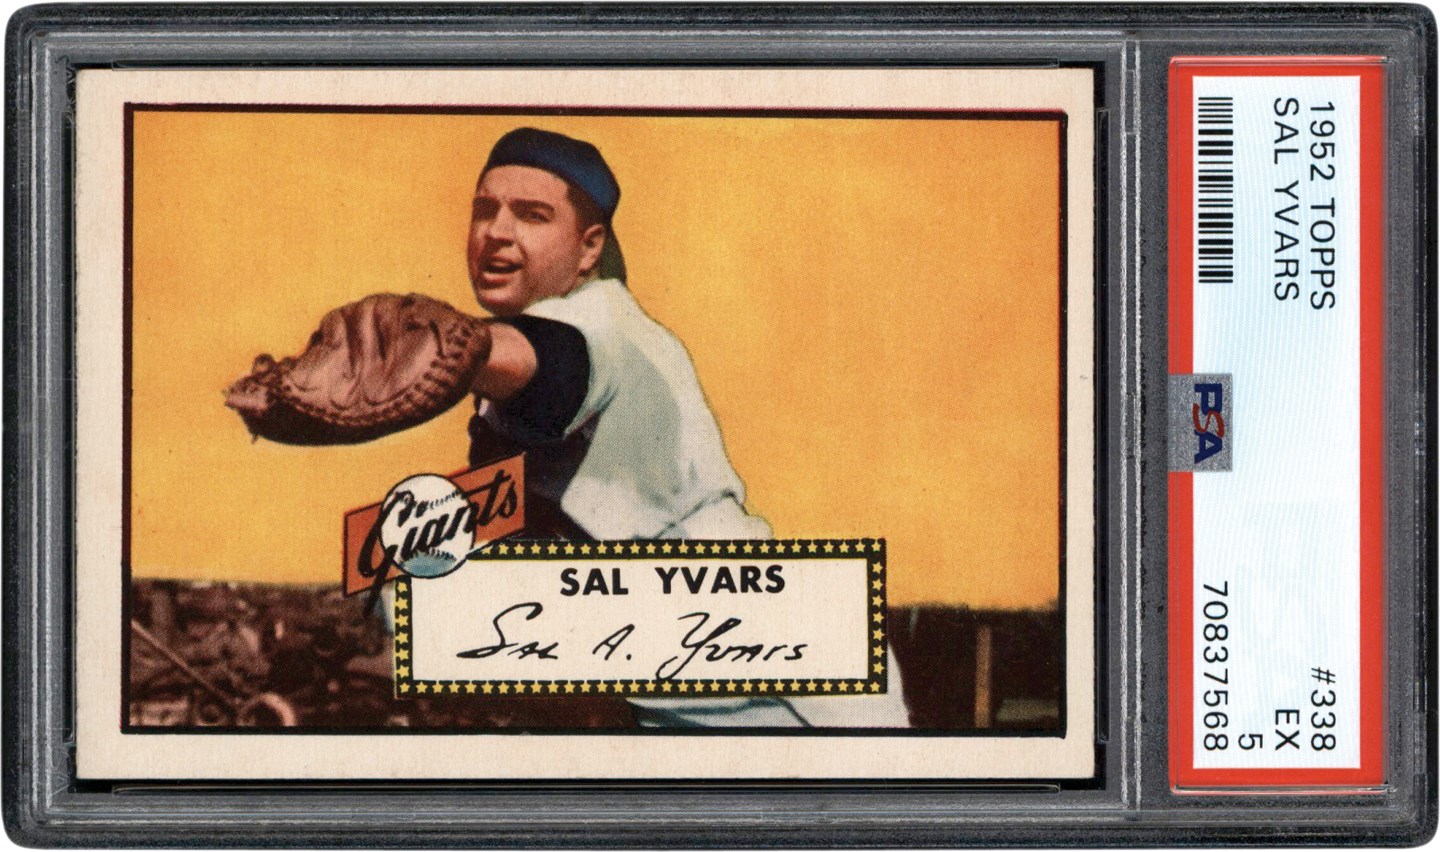 1952 Topps #338 Sal Yvars PSA EX 5 - Newly Discovered Example